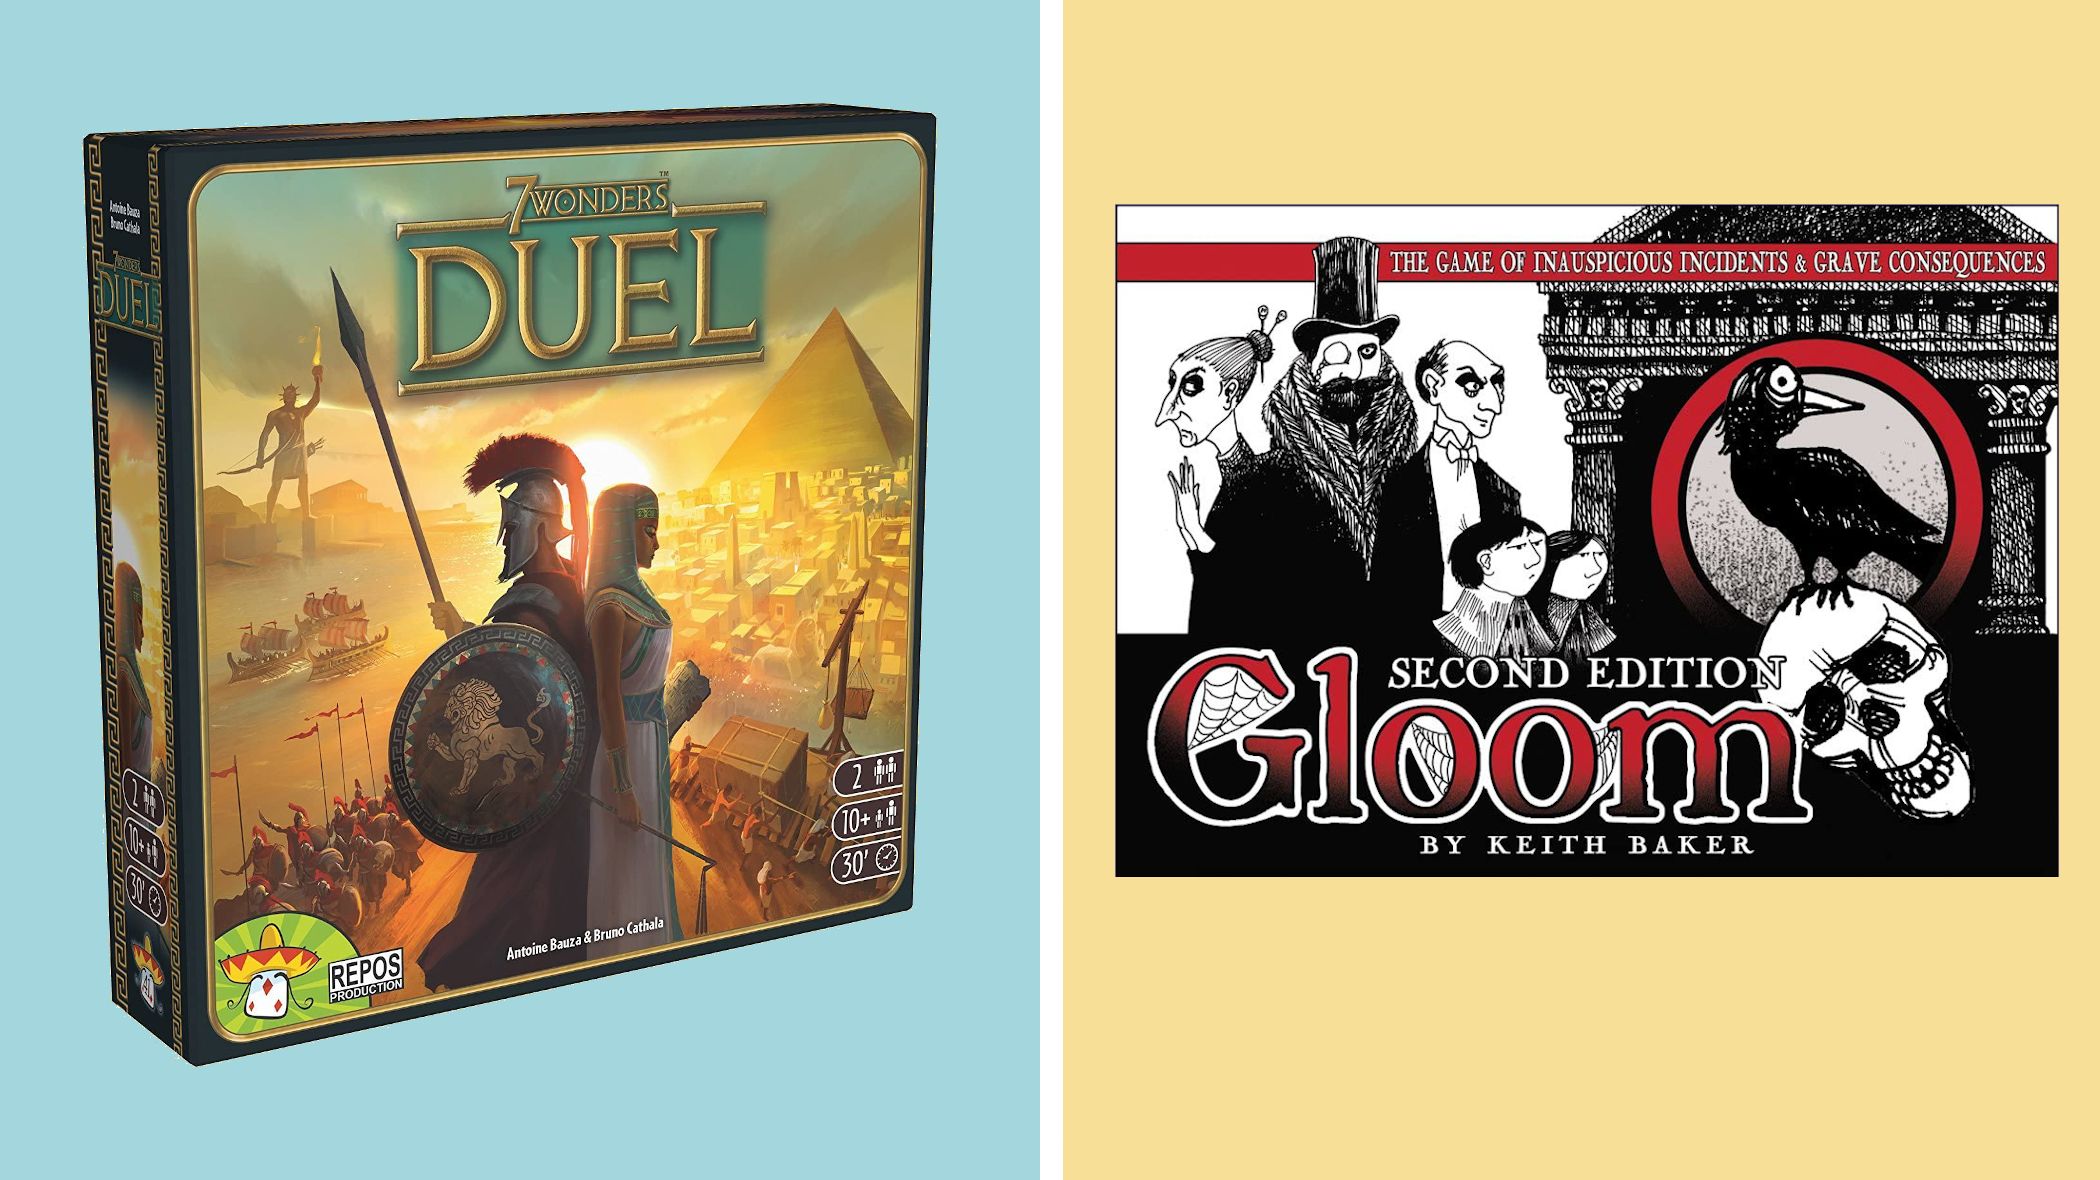 popular two player card games